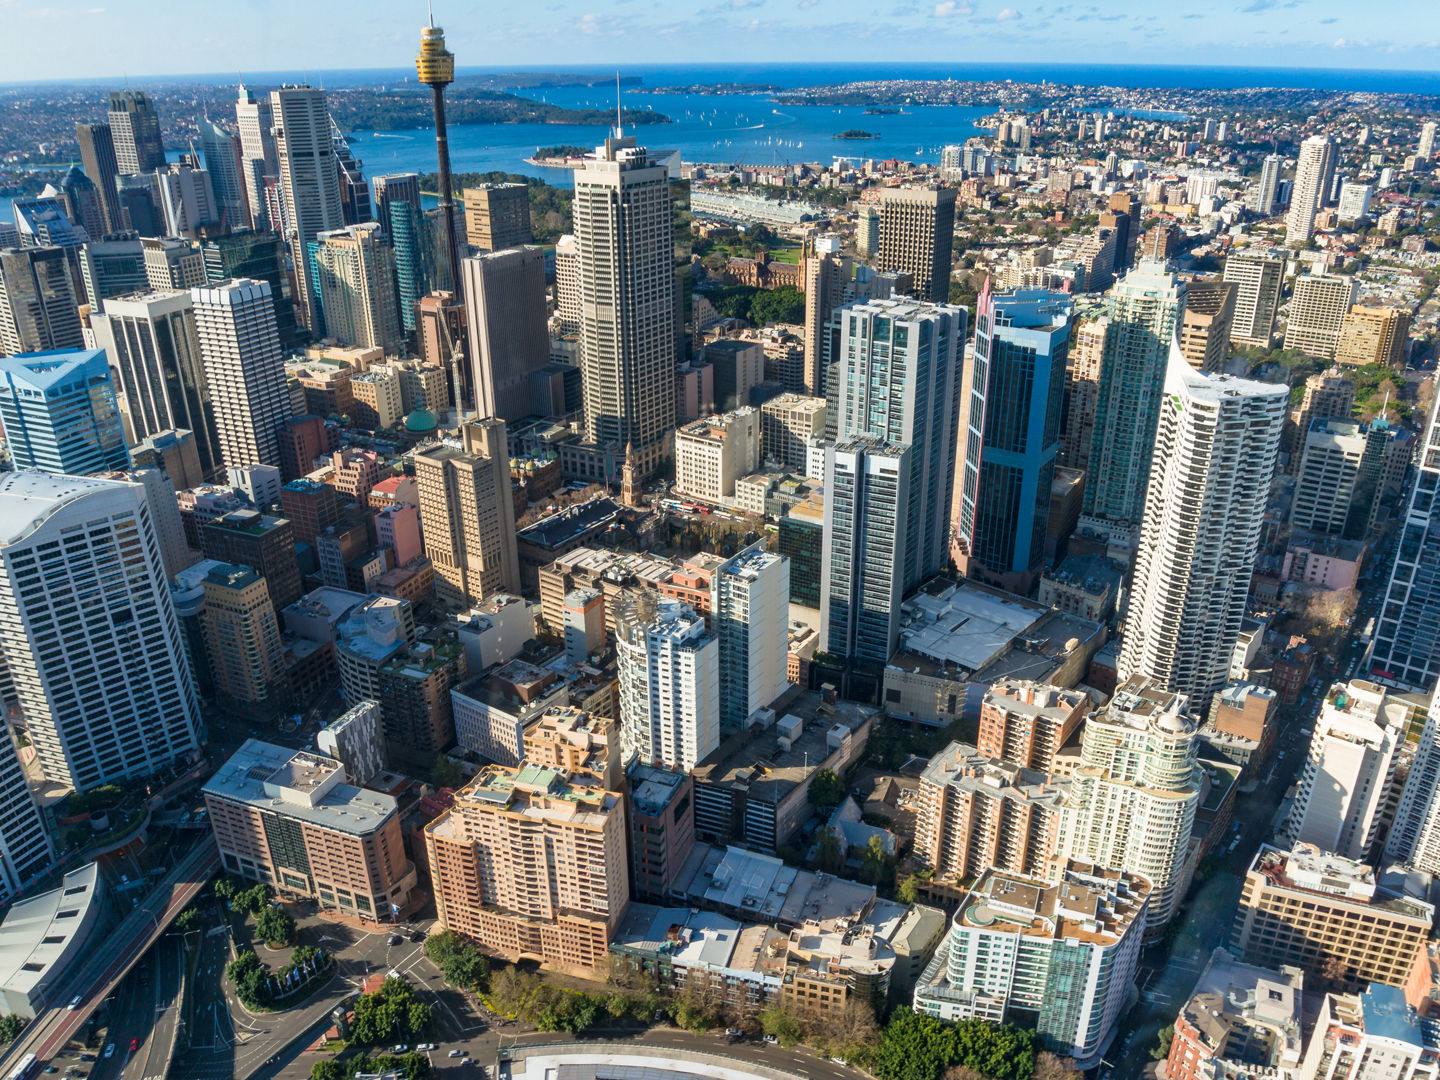 Aerial view of Sydney CBD with Sydney tower and financial district skyscrapers